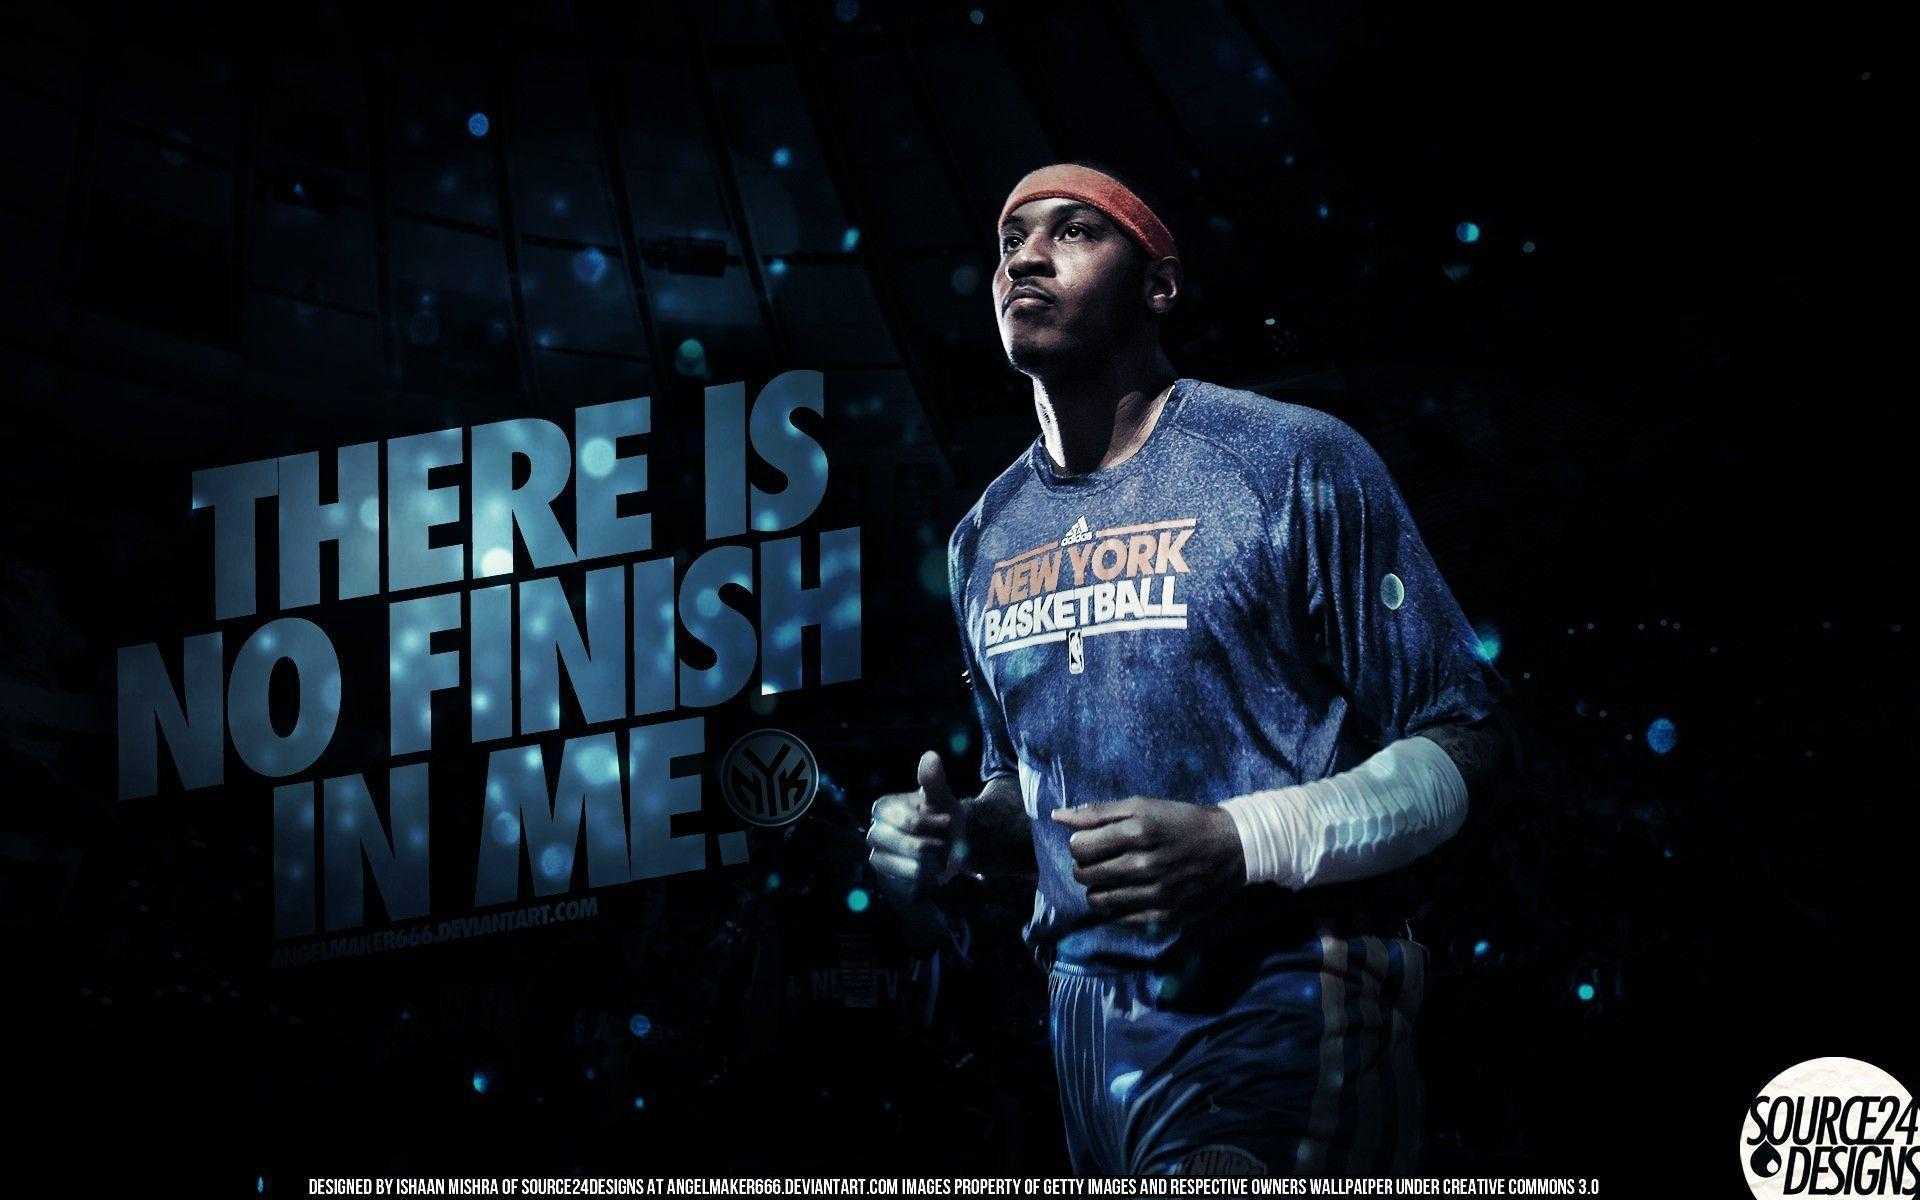 Nike Basketball Wallpaper Quotes Of Androids HD Image